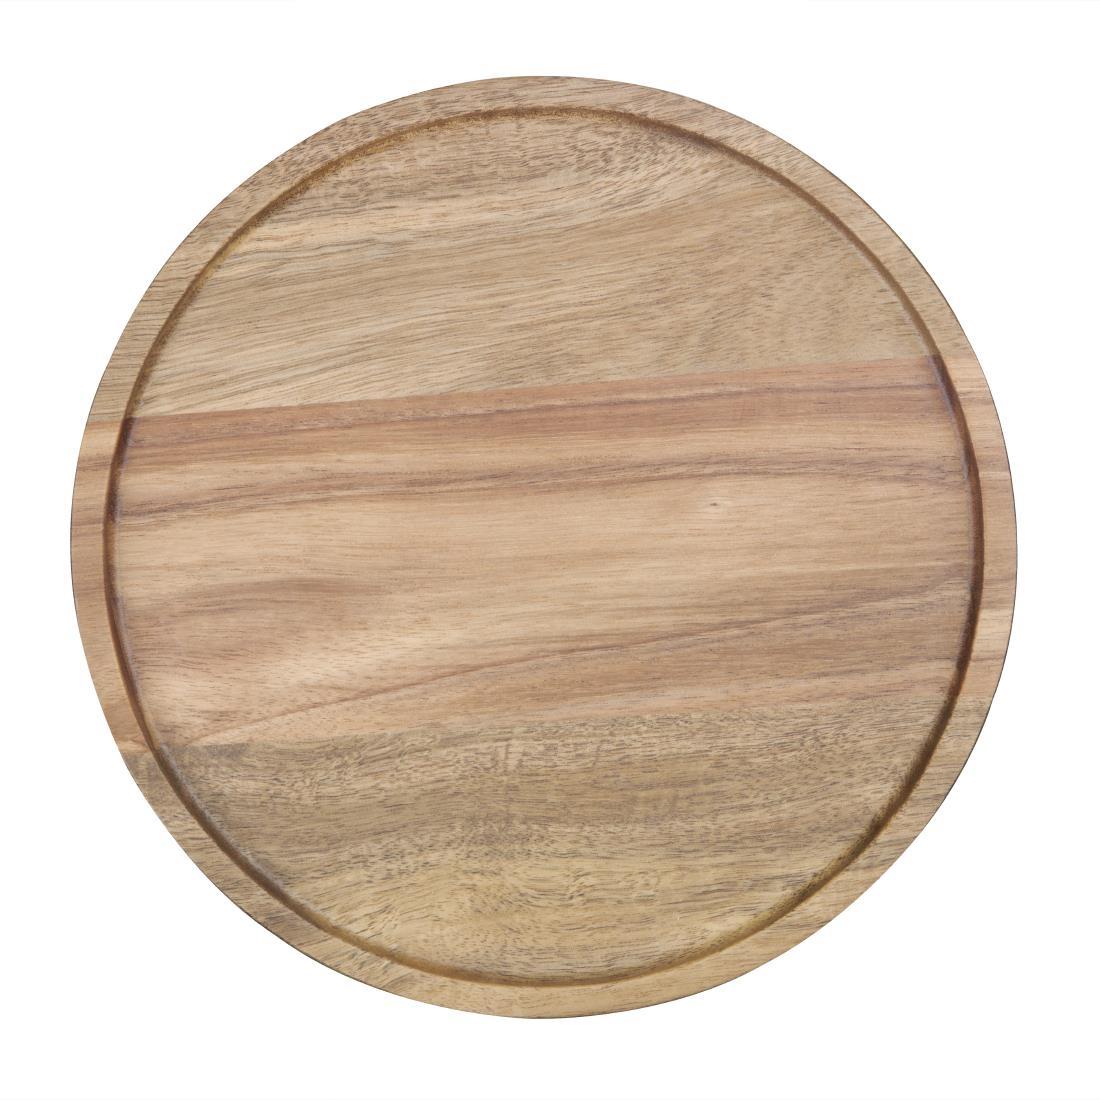 Olympia Acacia Round Plates 200(D)mm - FT611  - 3